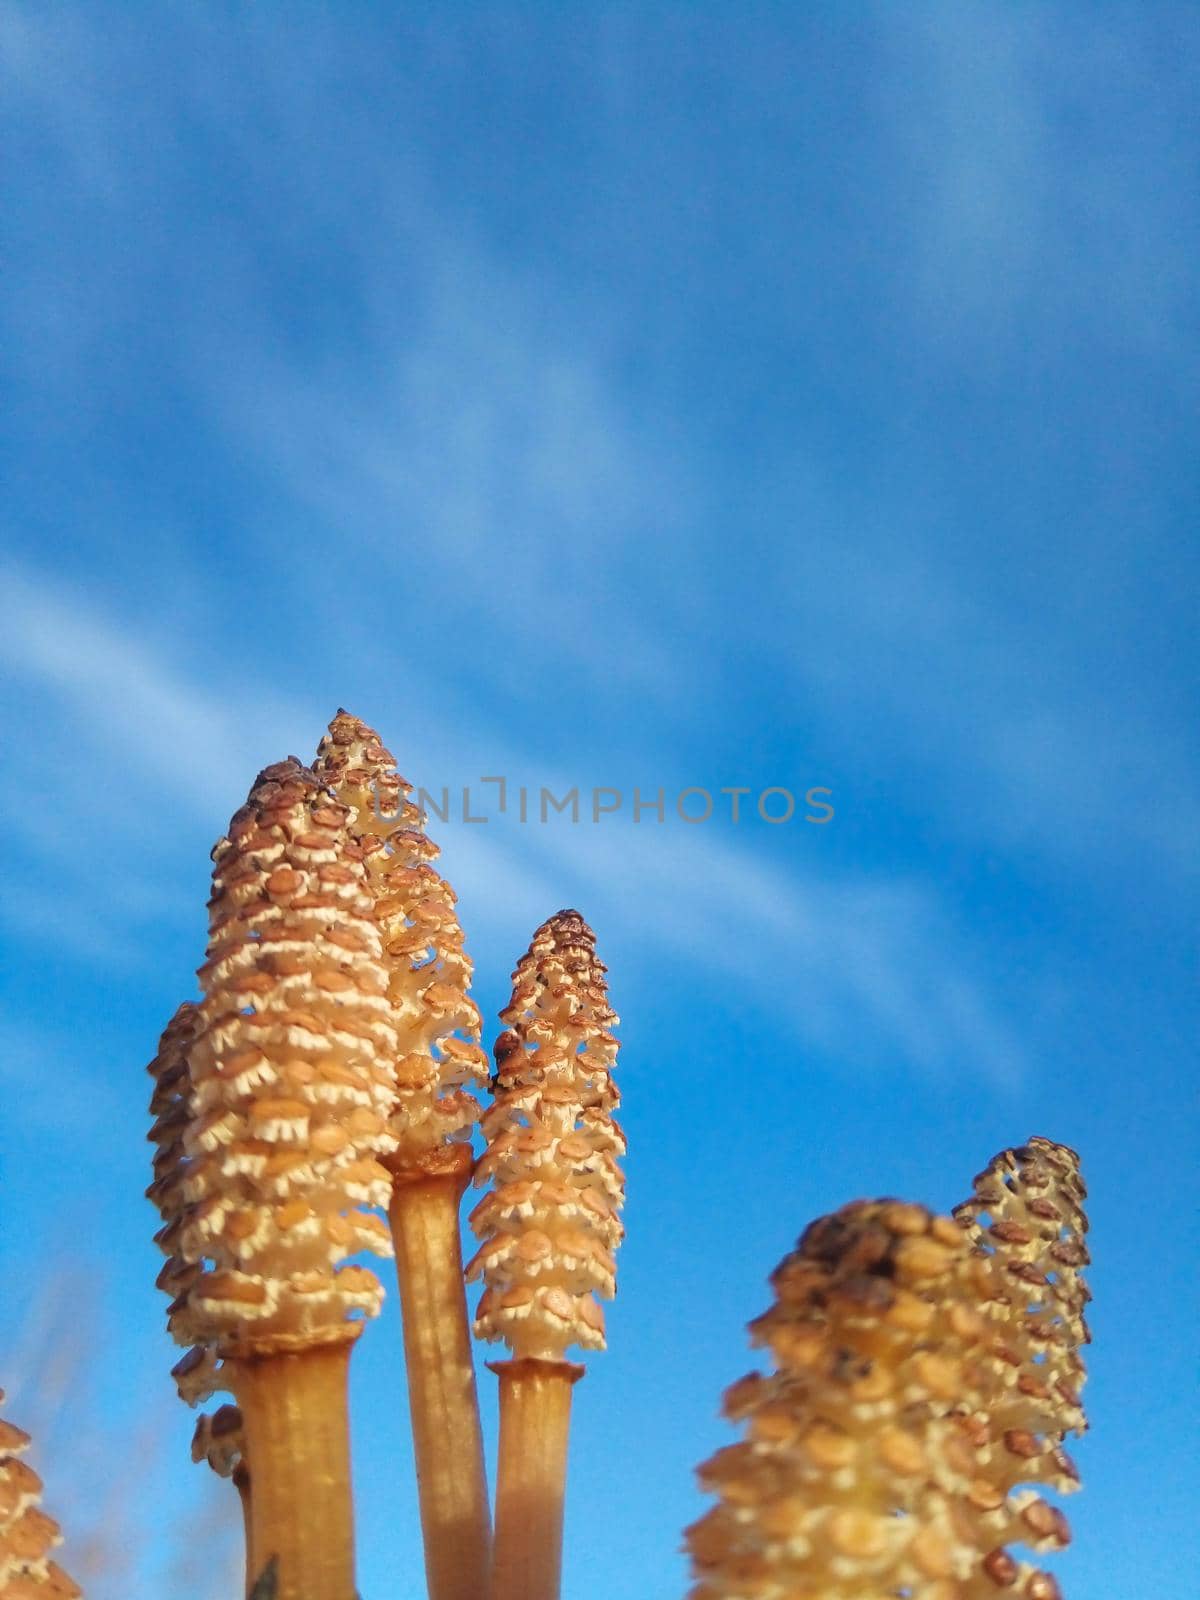 Spore cones of water horsetail emerging from swampy soil against a blue sky background.